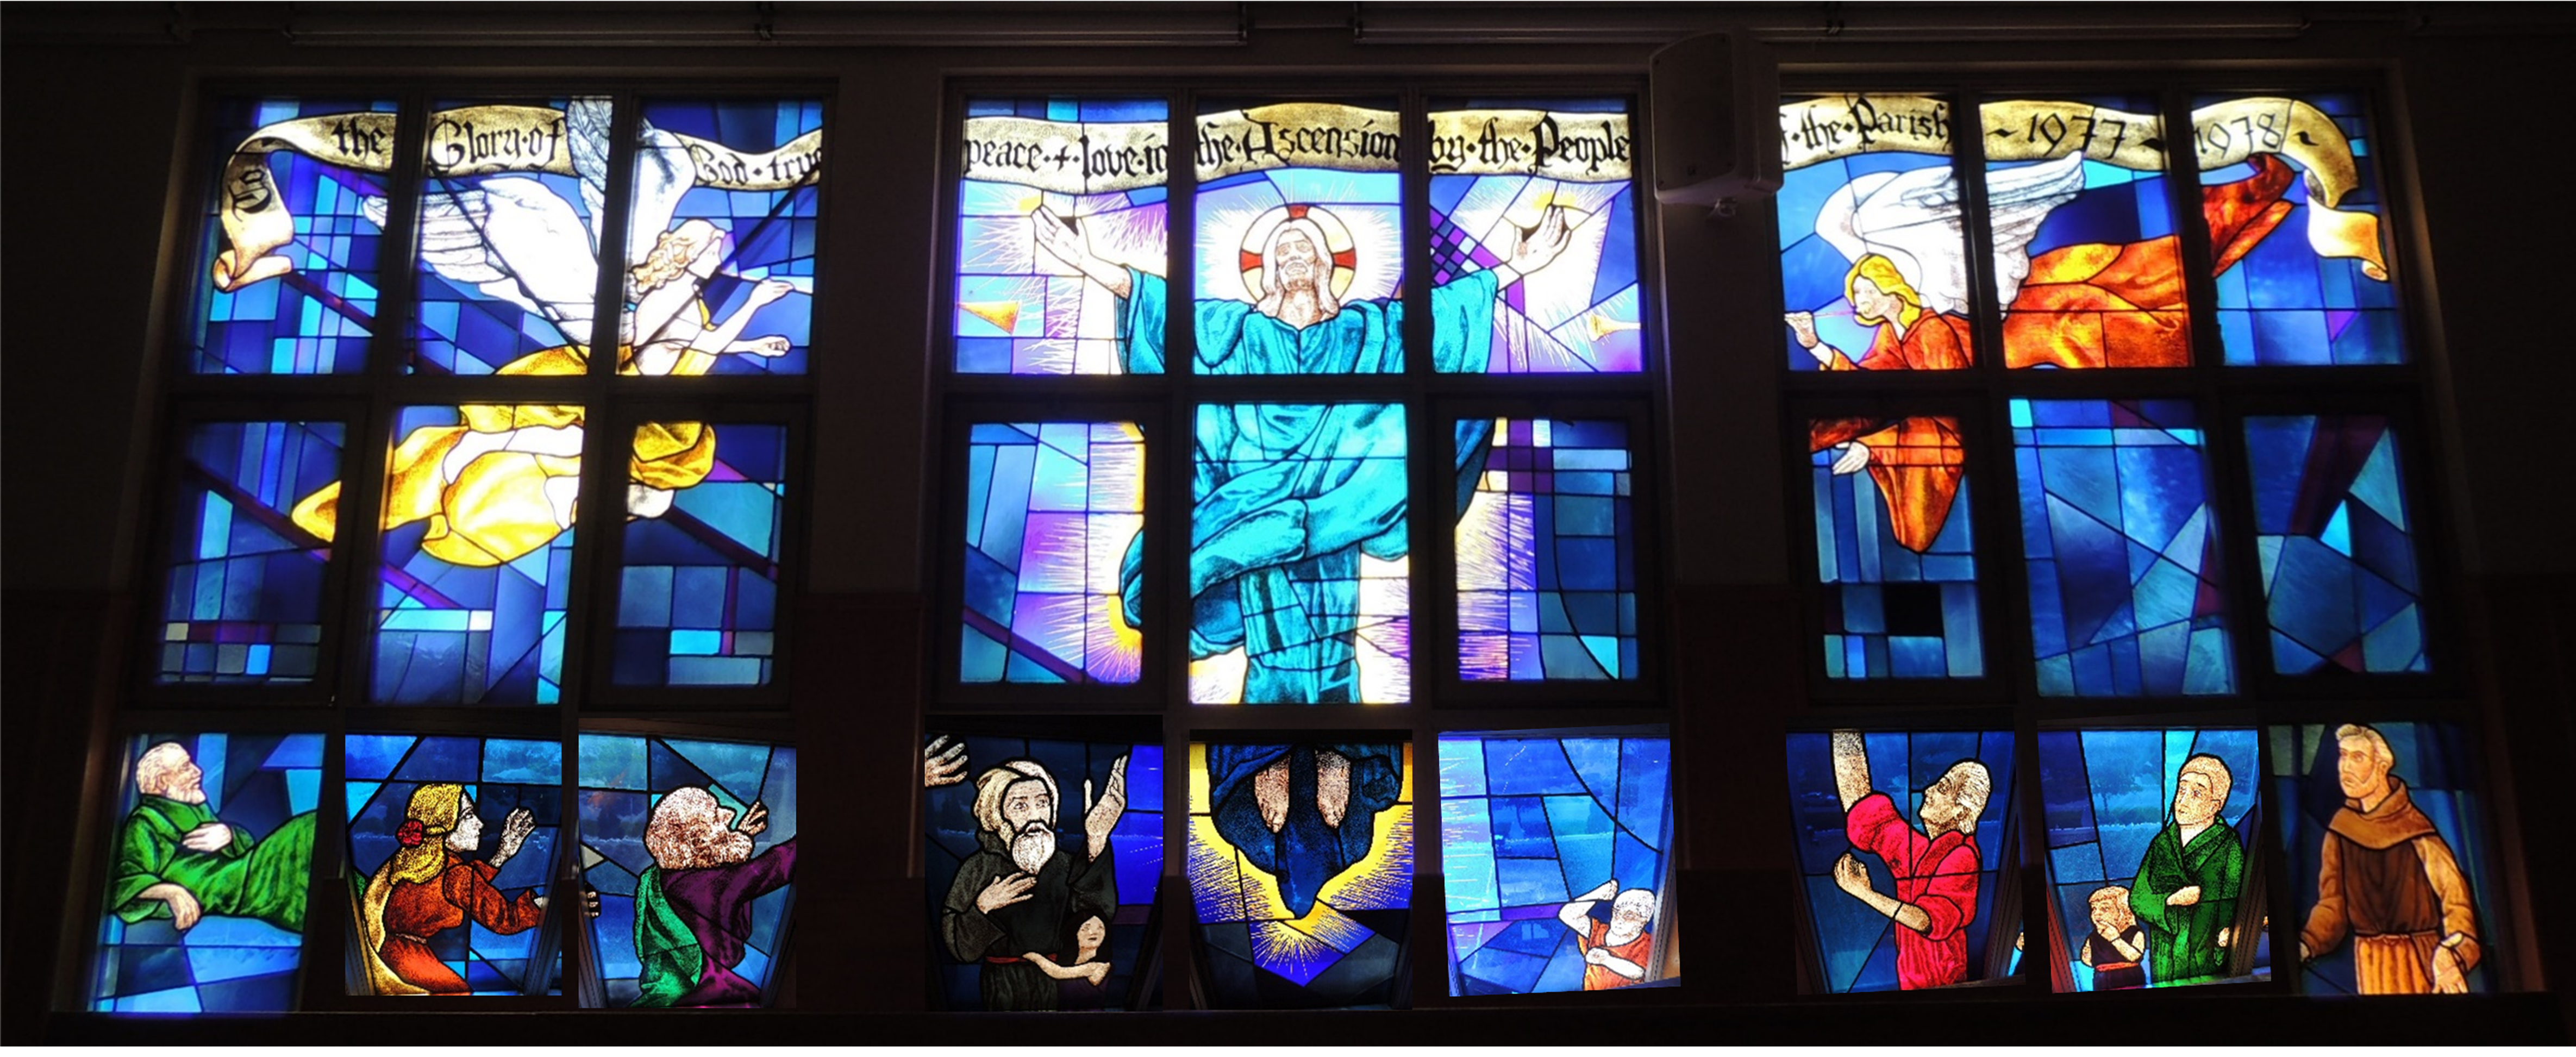 Ascension complete - stained glass window